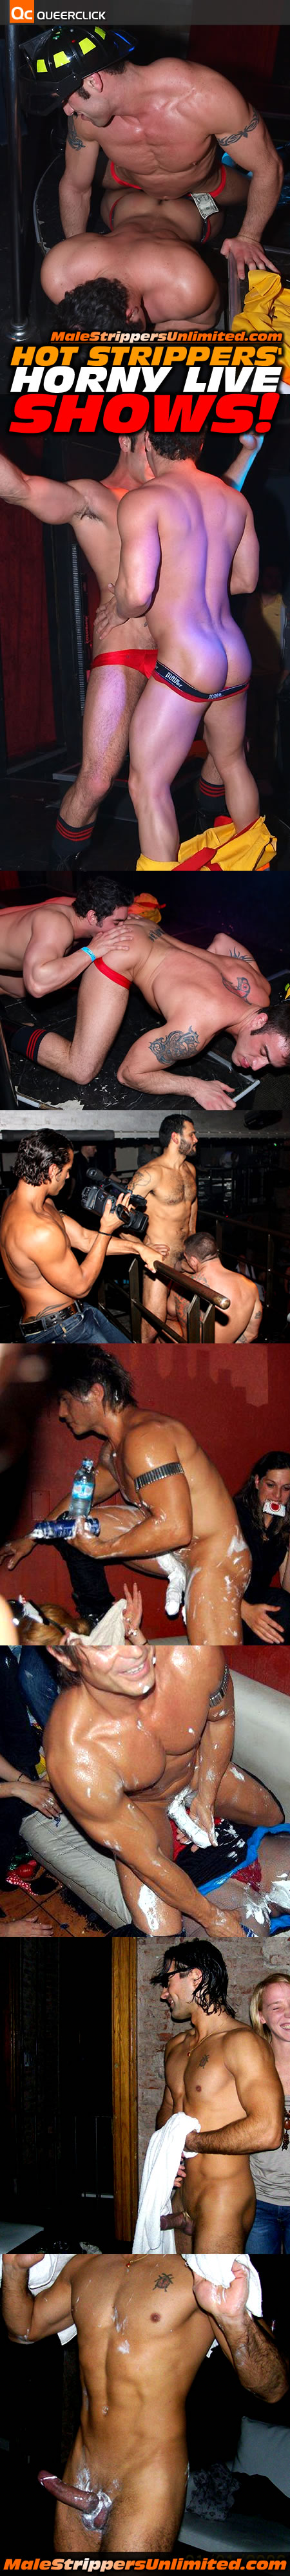 Male Strippers Unlimited: Hot Strippers' Horny Live Shows